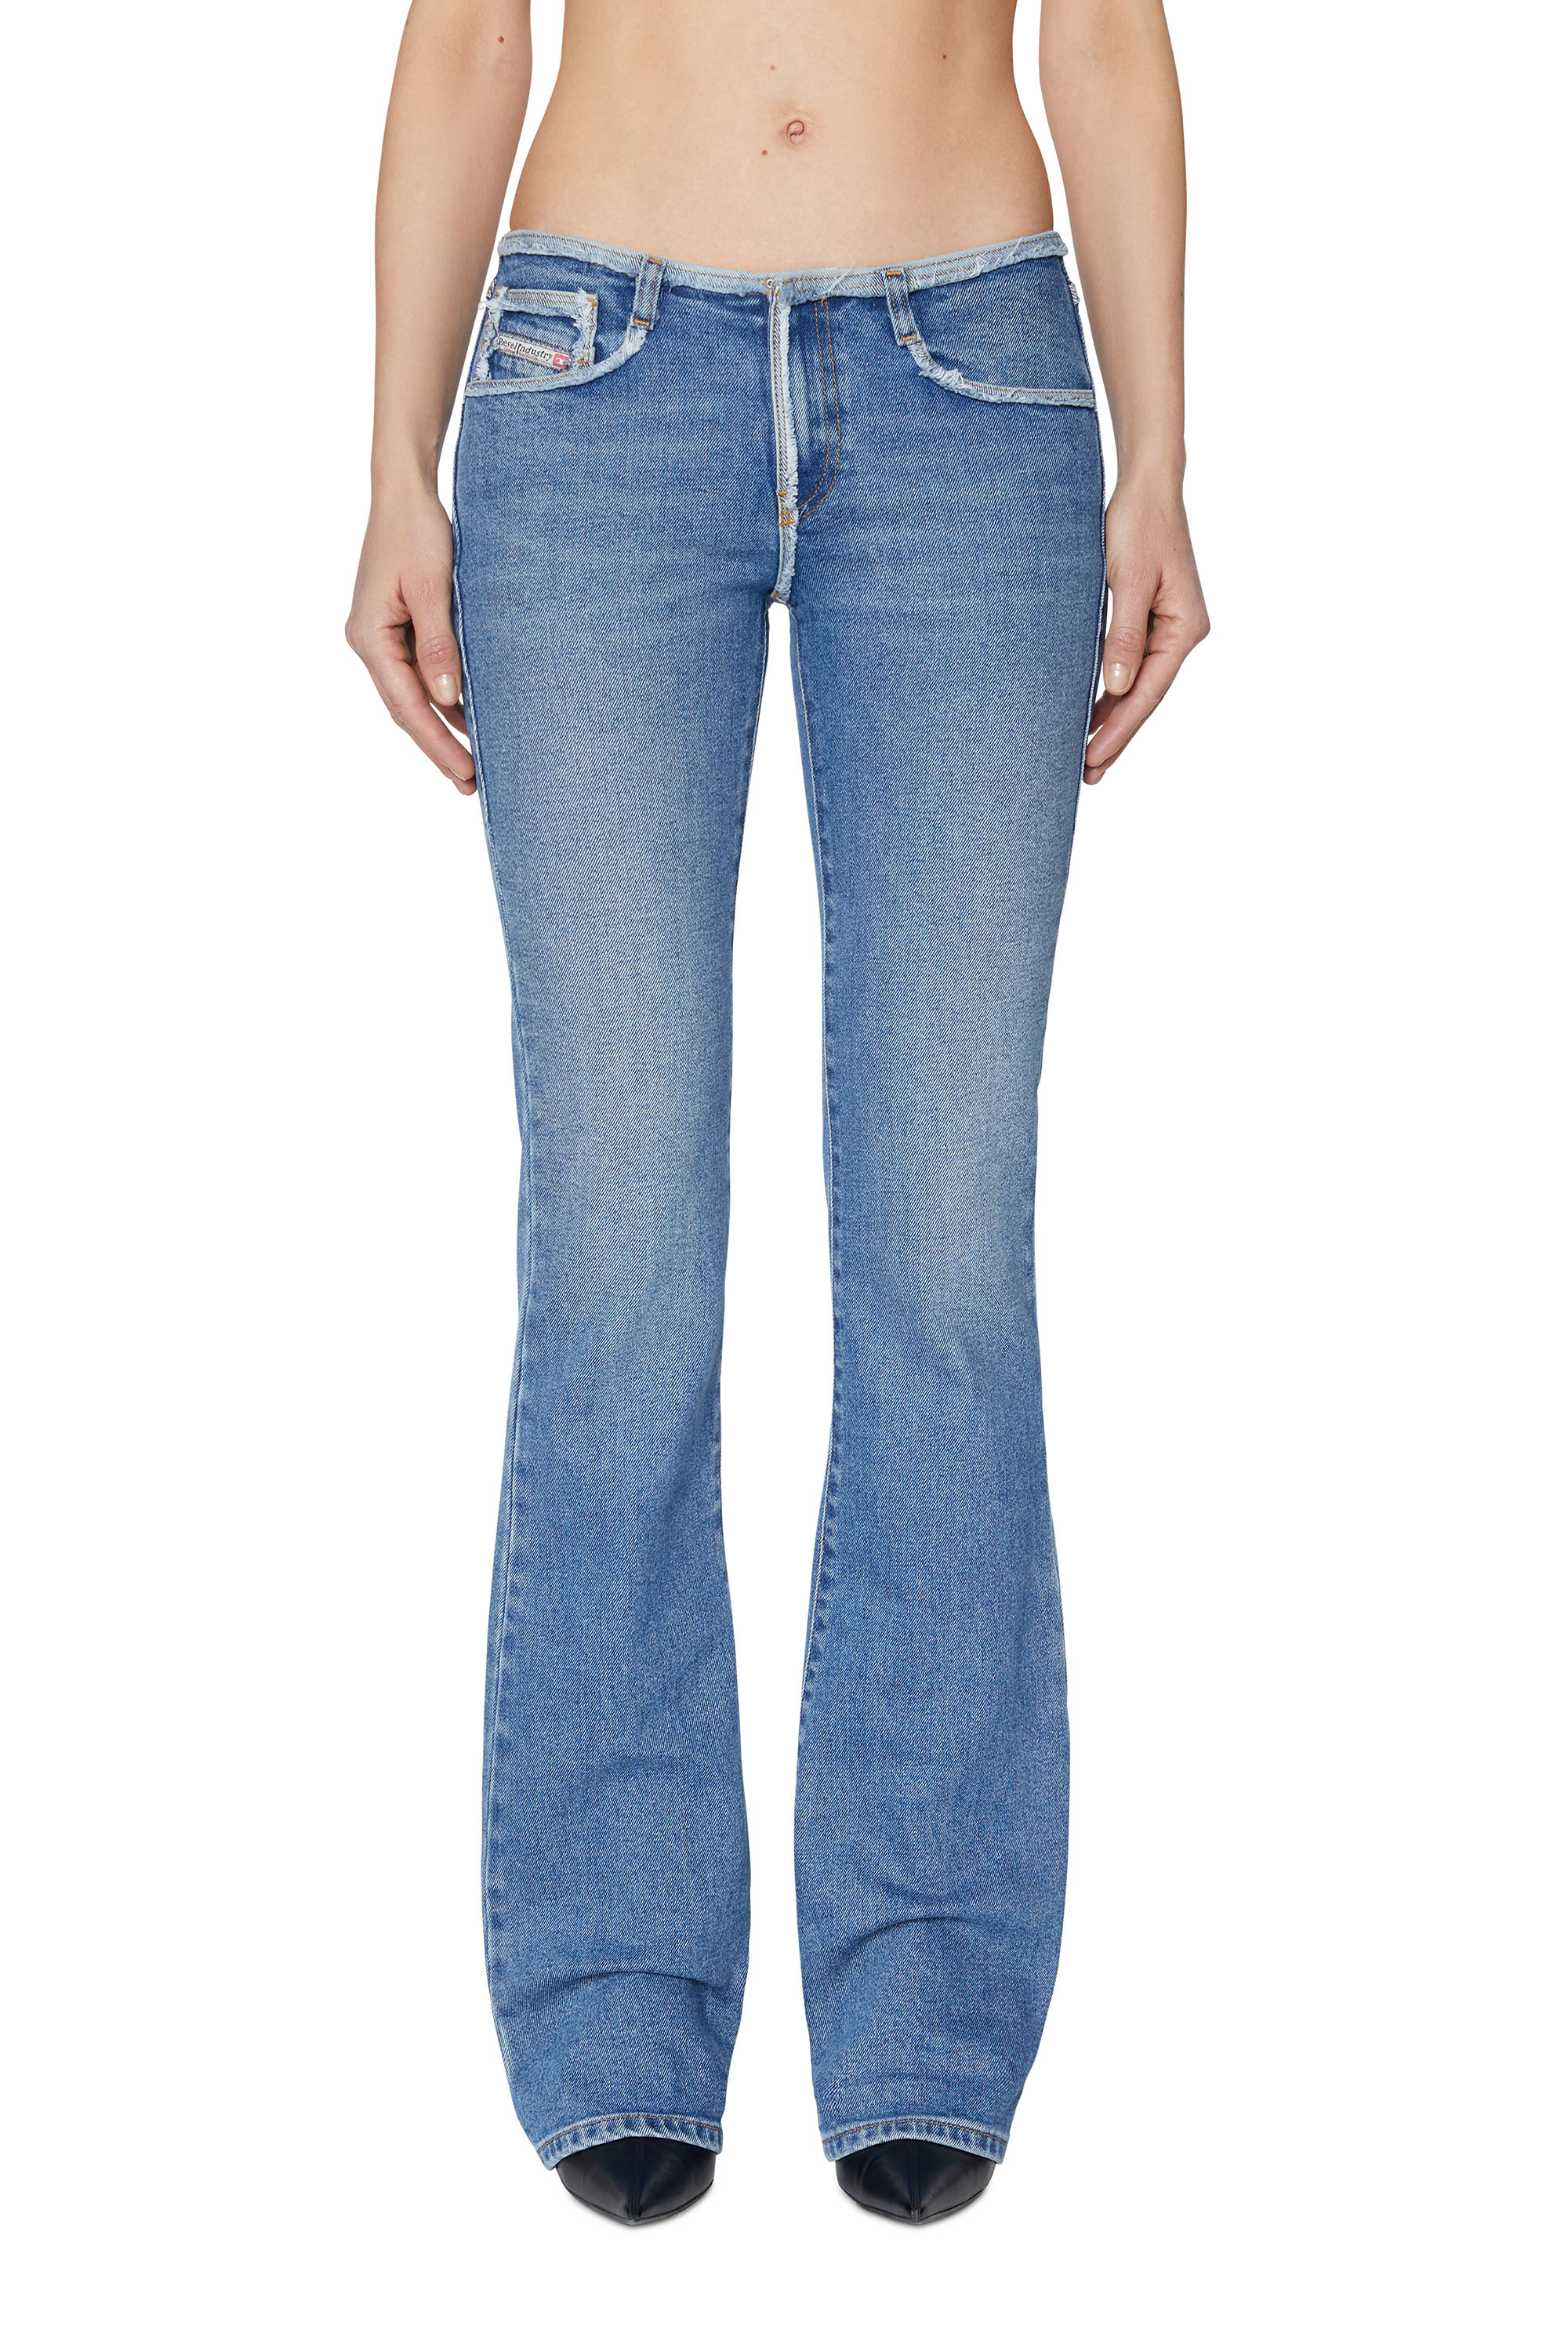 1969 D-EBBEY 09E19 Bootcut and Flare Jeans, ミディアムブルー - ジーンズ